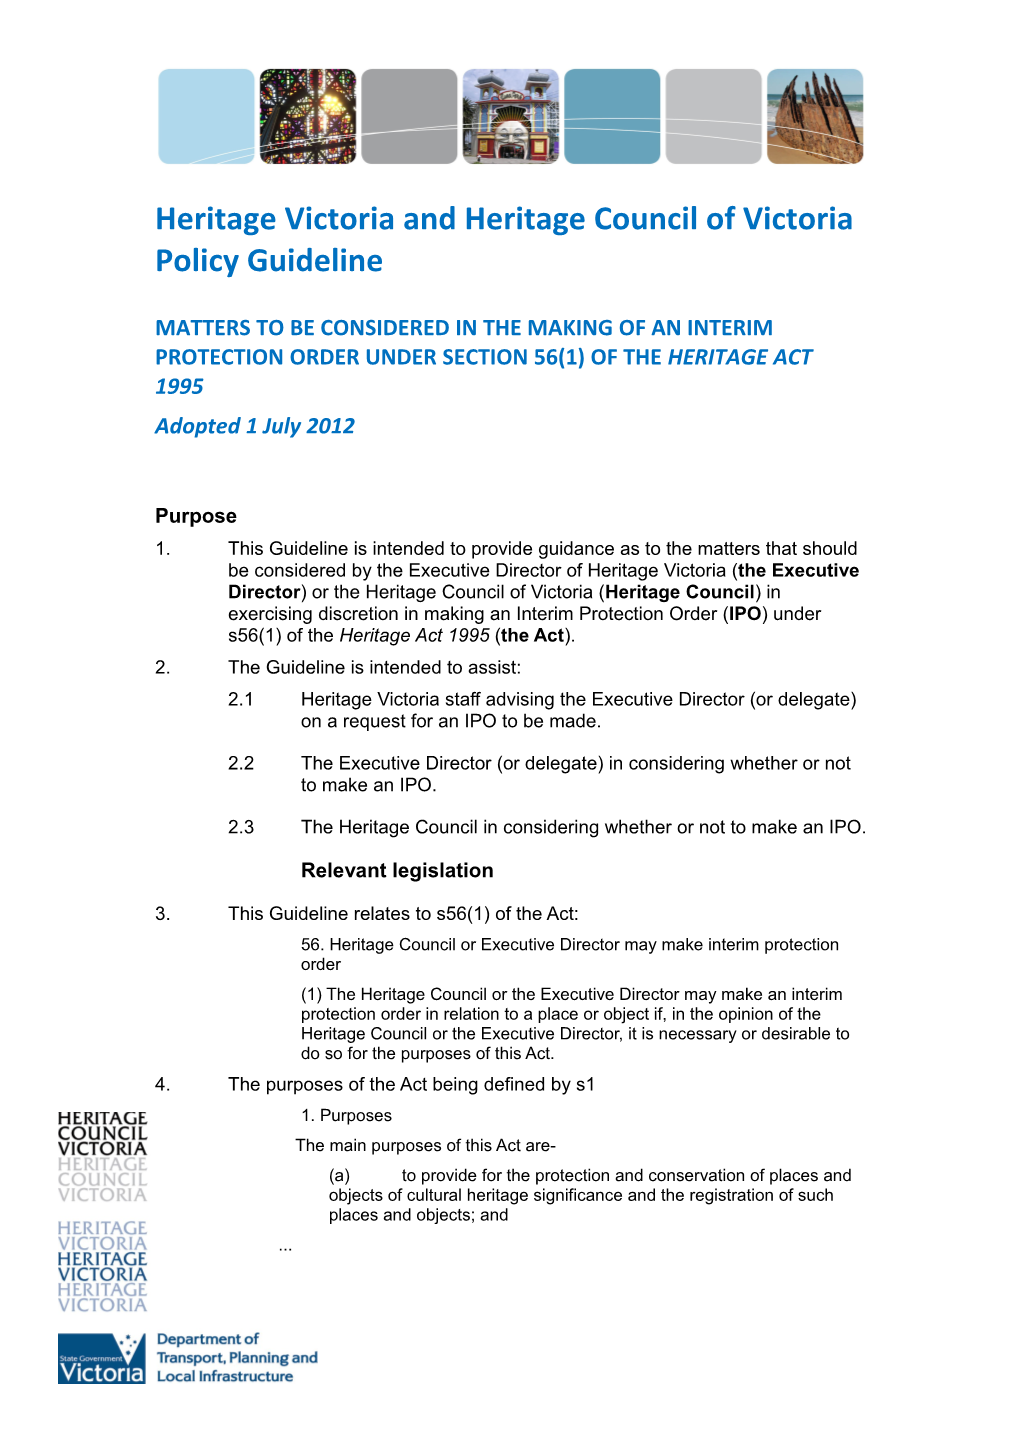 Heritage Victoria Policy Guideline